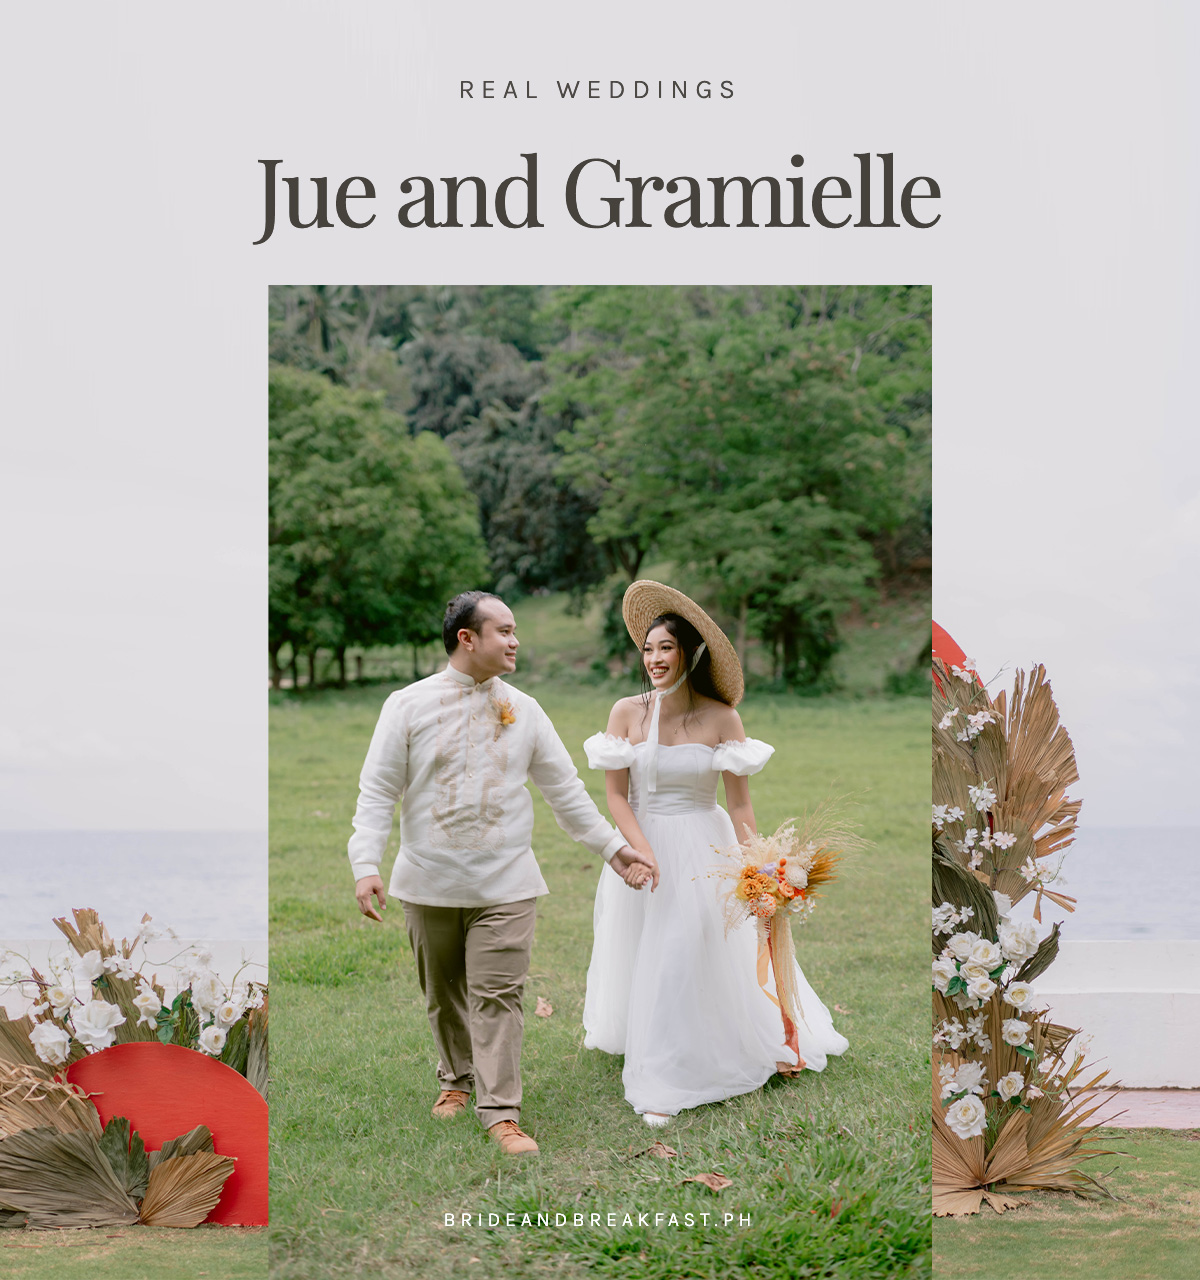 Jue and Gramielle